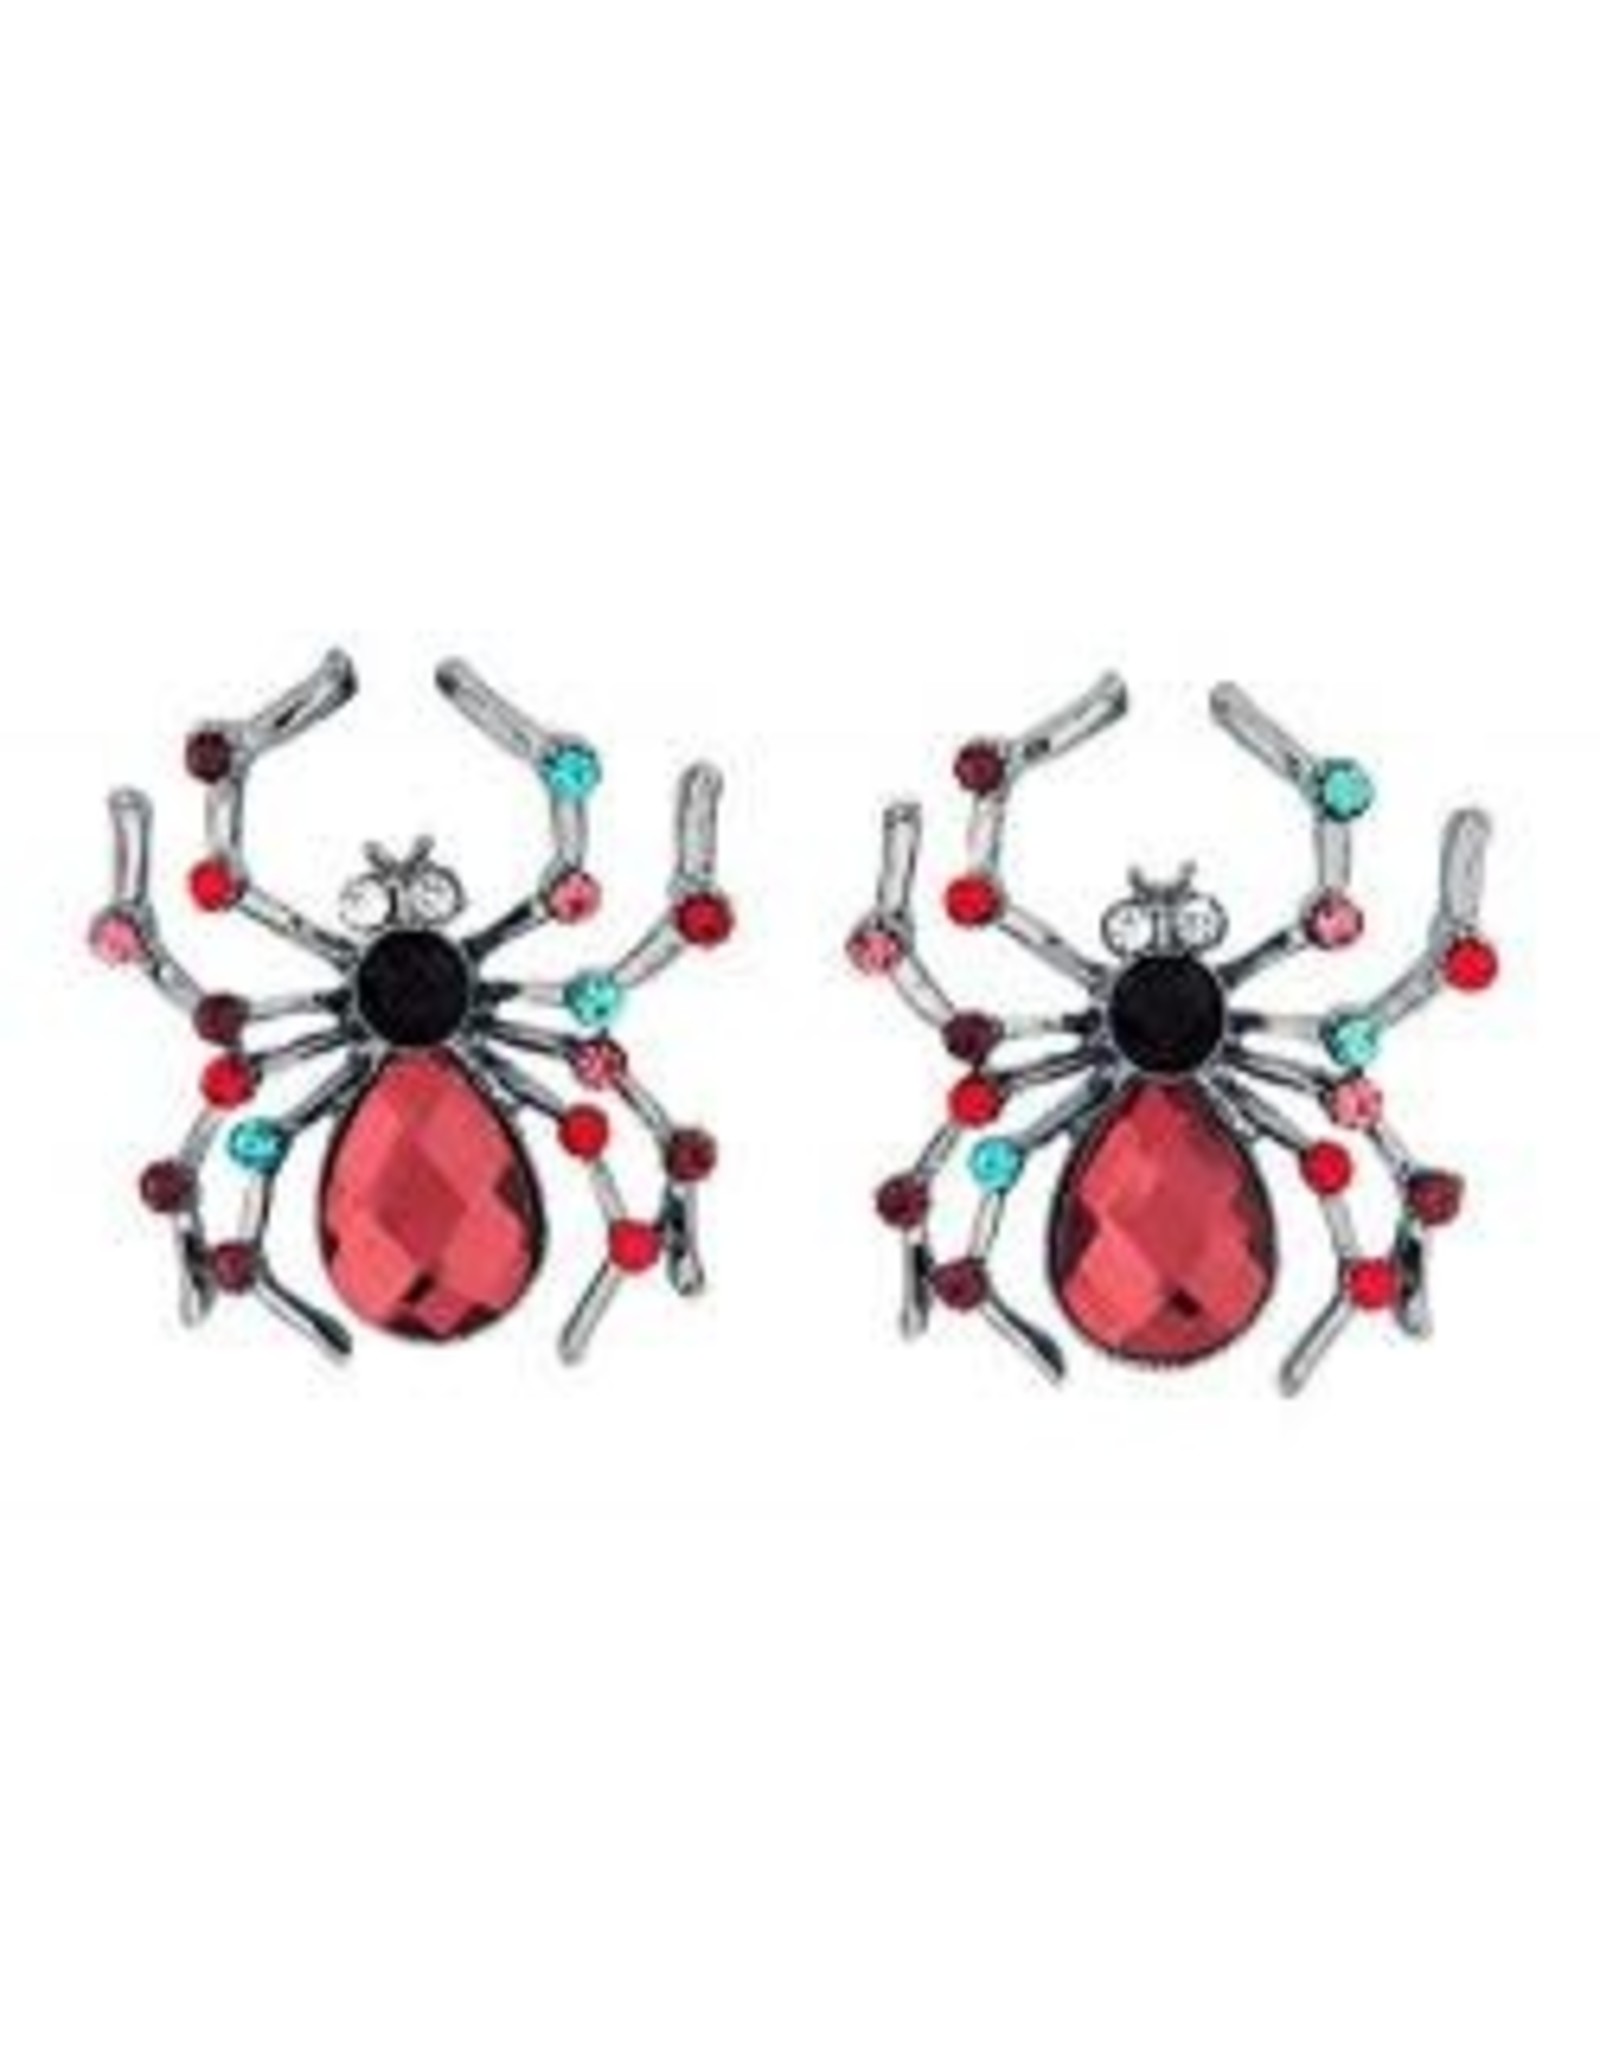 Rubie's Costumes ACC MULTI COLOR SPIDER EARRINGS